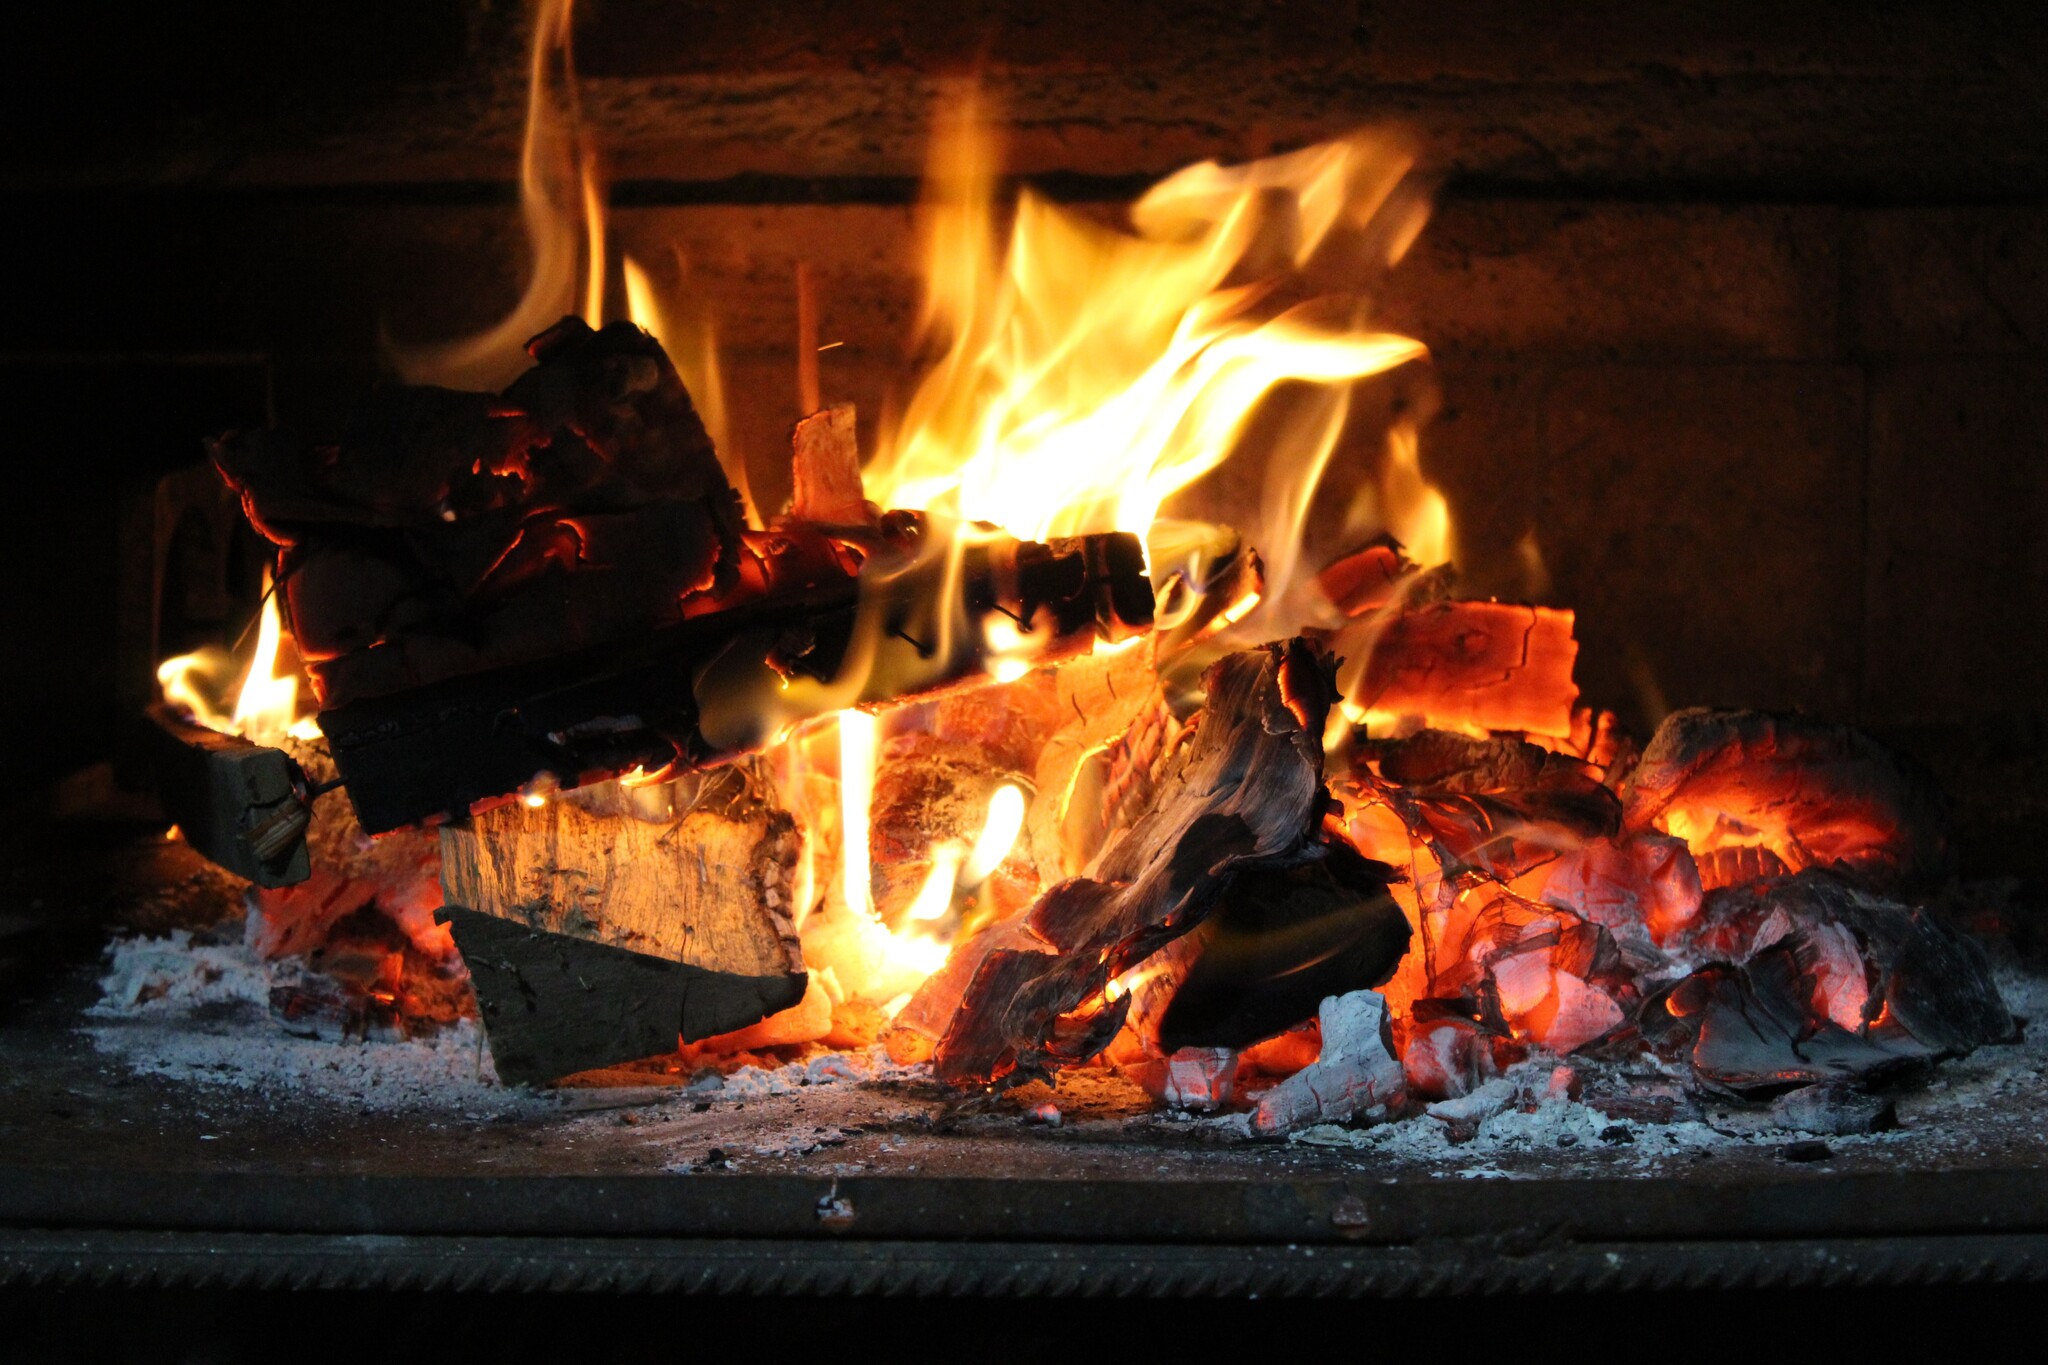 A fire burning in a fireplace. 